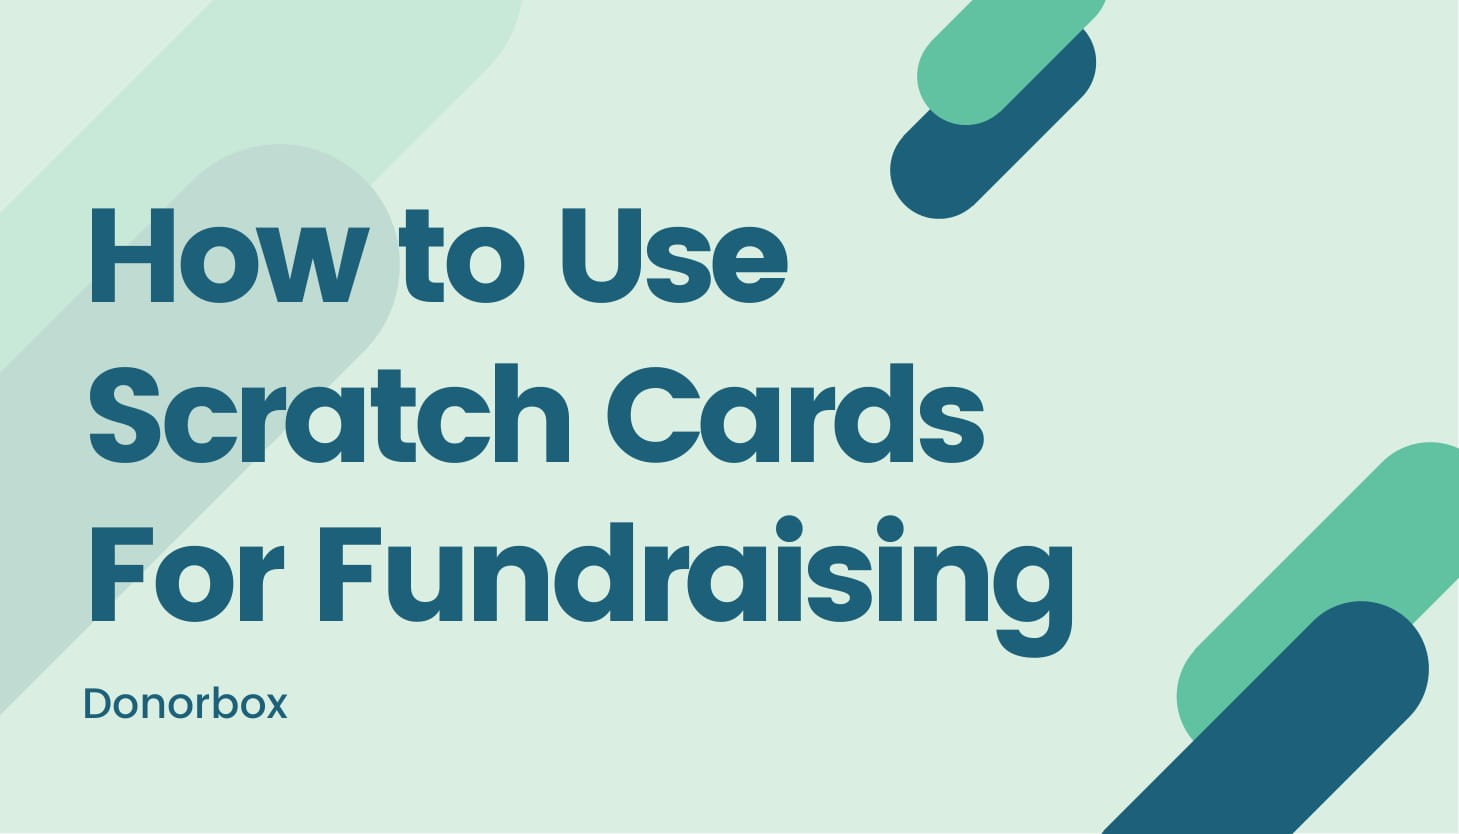 How to Use Scratch Cards For Fundraising